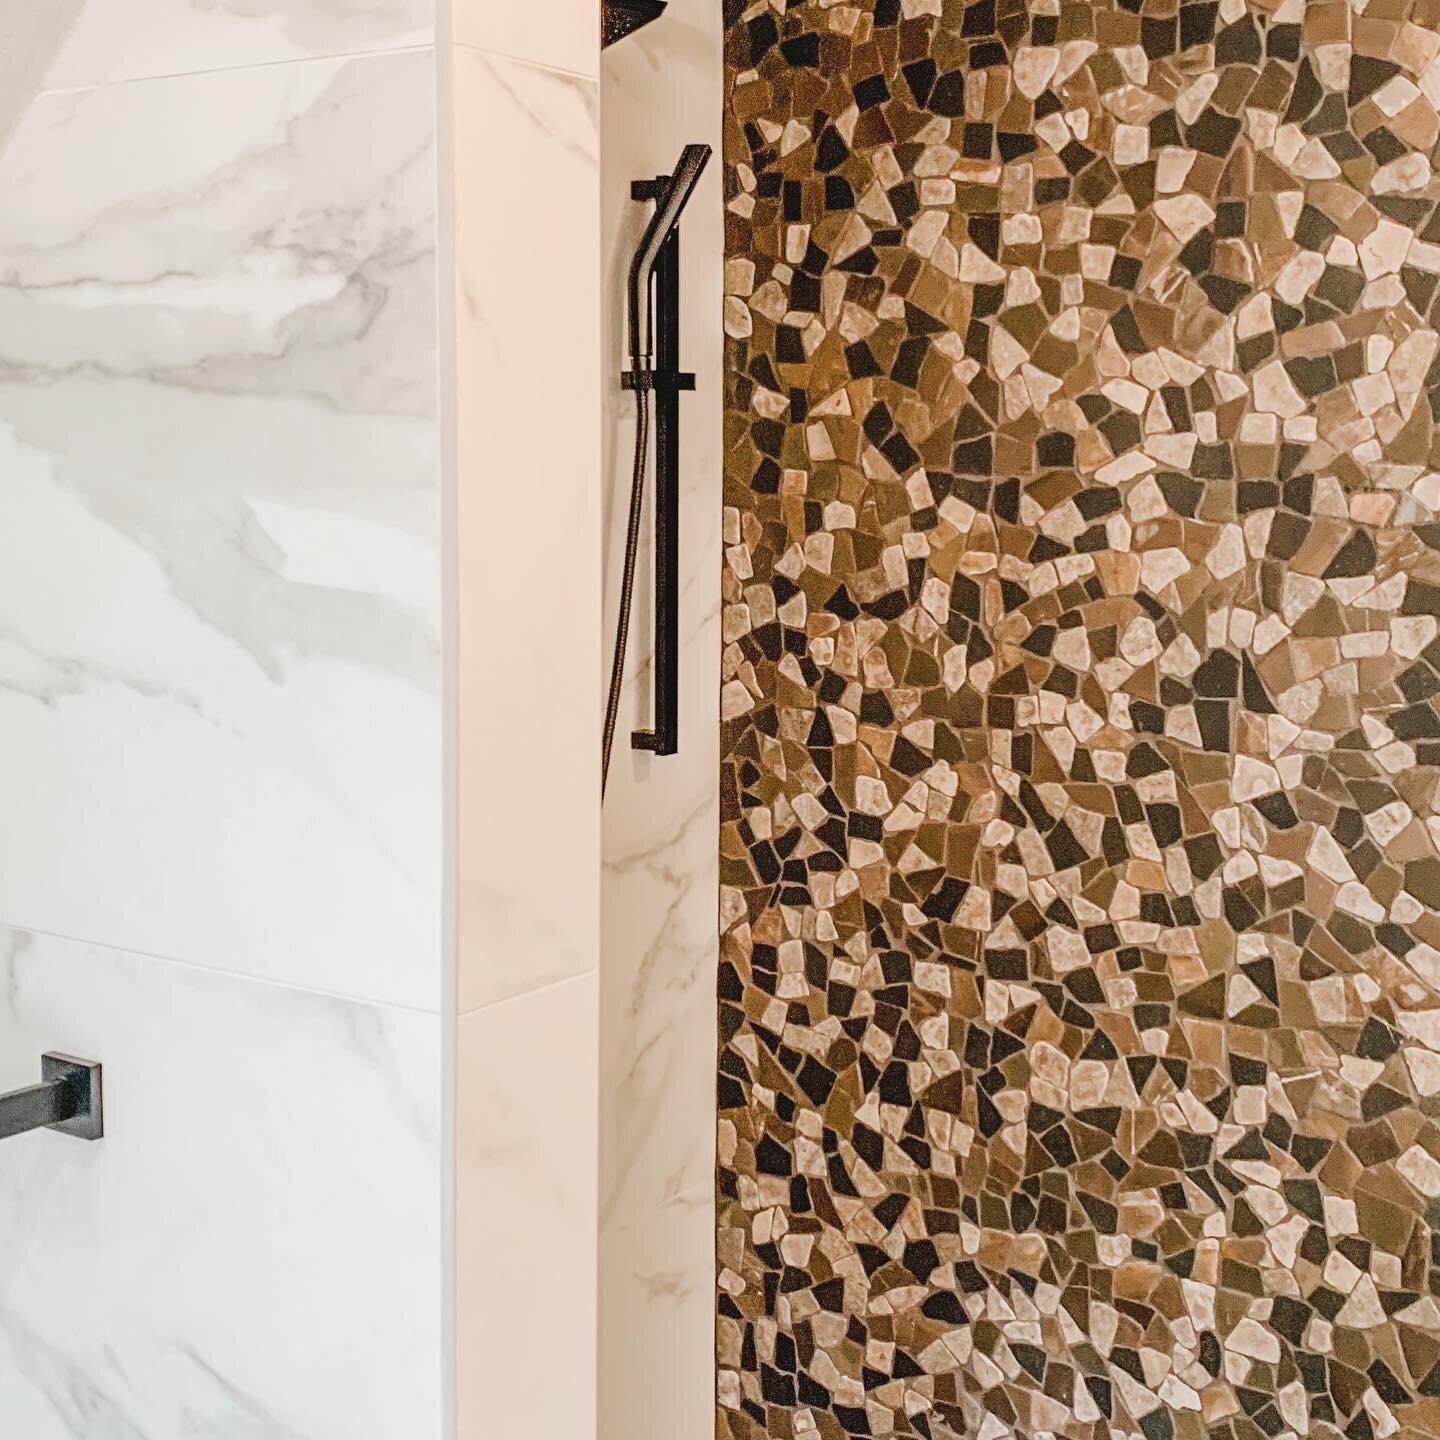 Happy Friday!  We are pretty excited to be wrapping up this project in DT Portland and grateful for all the hard work from the team.  More pics to come but a quick preview of some of the cool and warm tones in the tile as well as large format + small